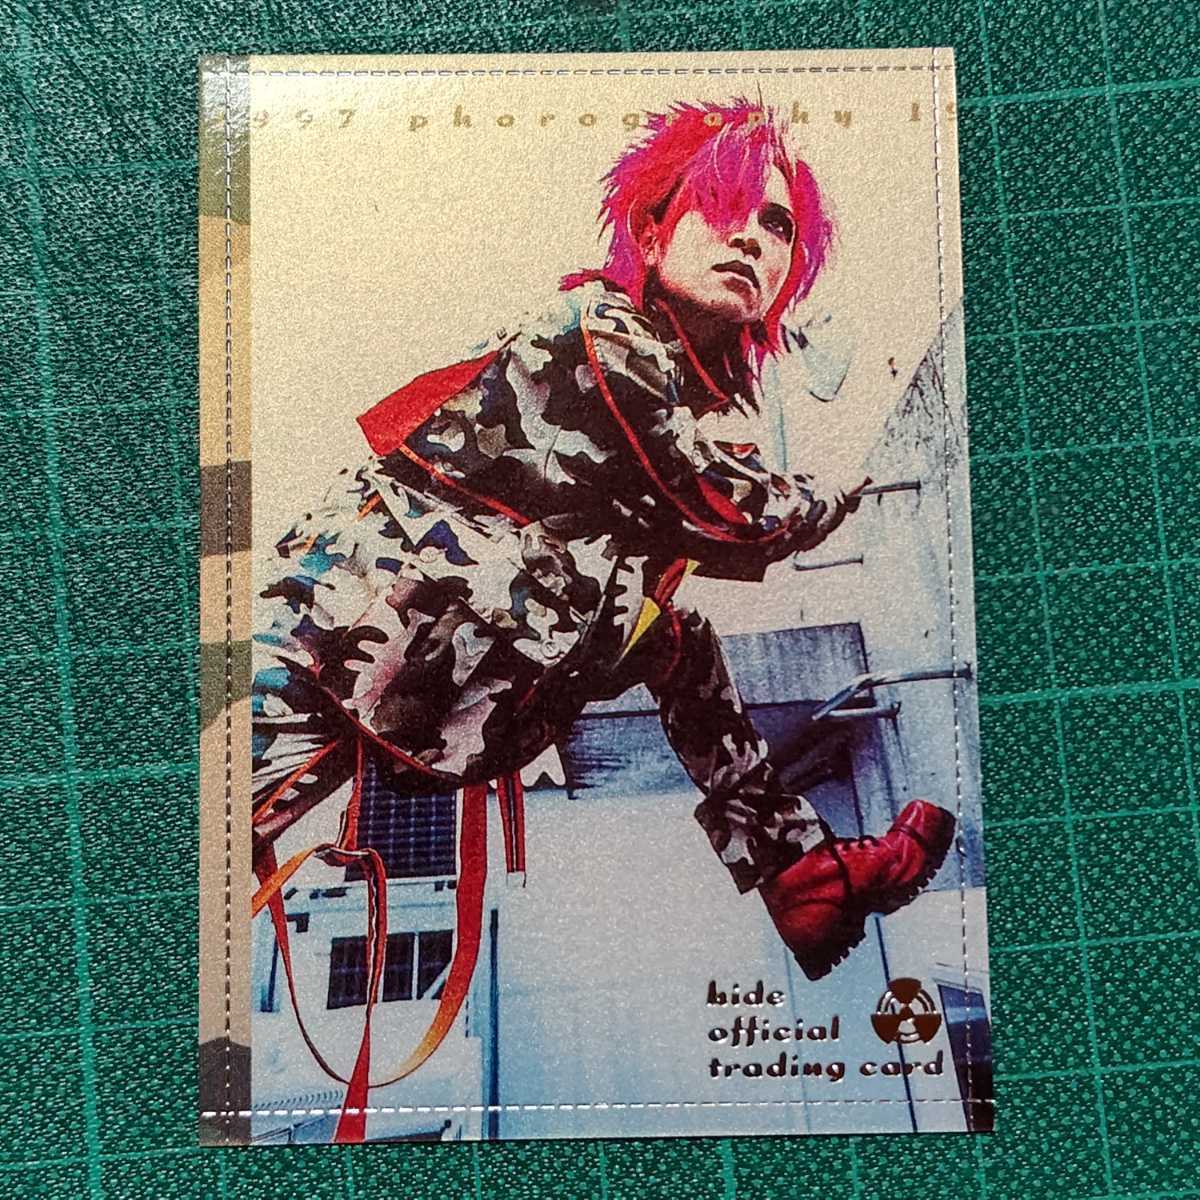 hide trading card No.109 / inspection PSYENCE HIDE YOUR FACE hide with spread beaver Zilch XJAPAN T-shirt poster YOSHIKI Toshl